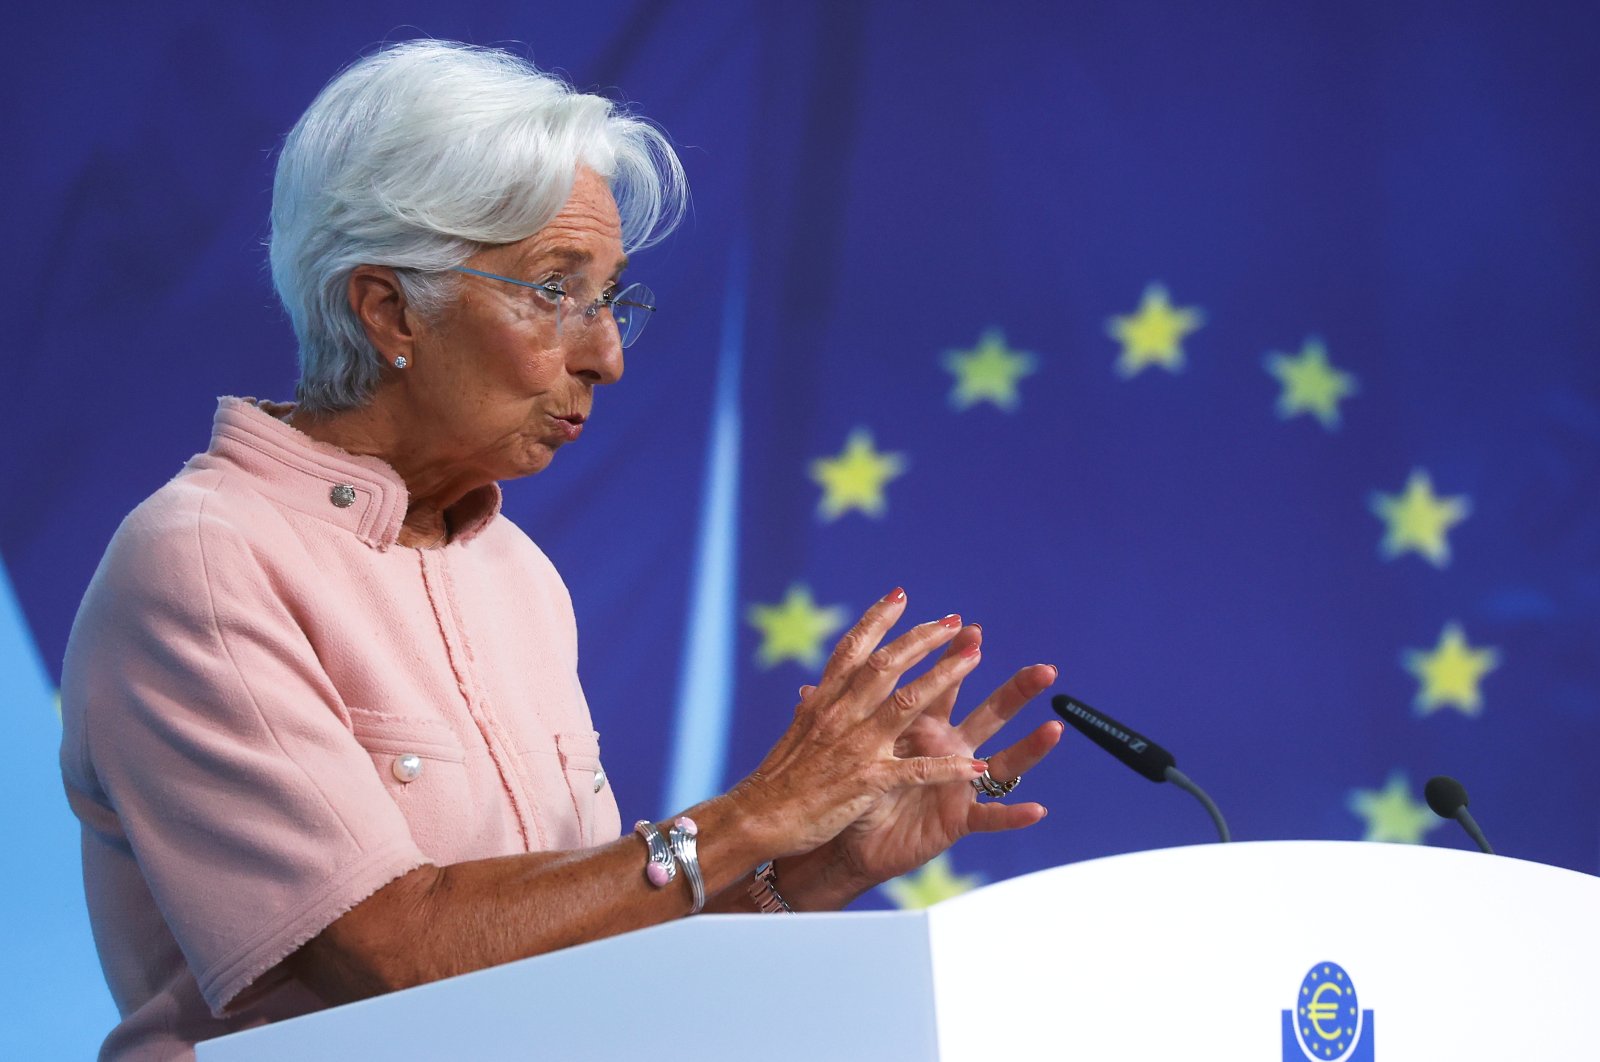 President of the European Central Bank (ECB) Christine Lagarde speaks as she takes part in a news conference on the outcome of the Governing Council meeting, in Frankfurt, Germany, Sept. 9, 2021. (Reuters Photo)